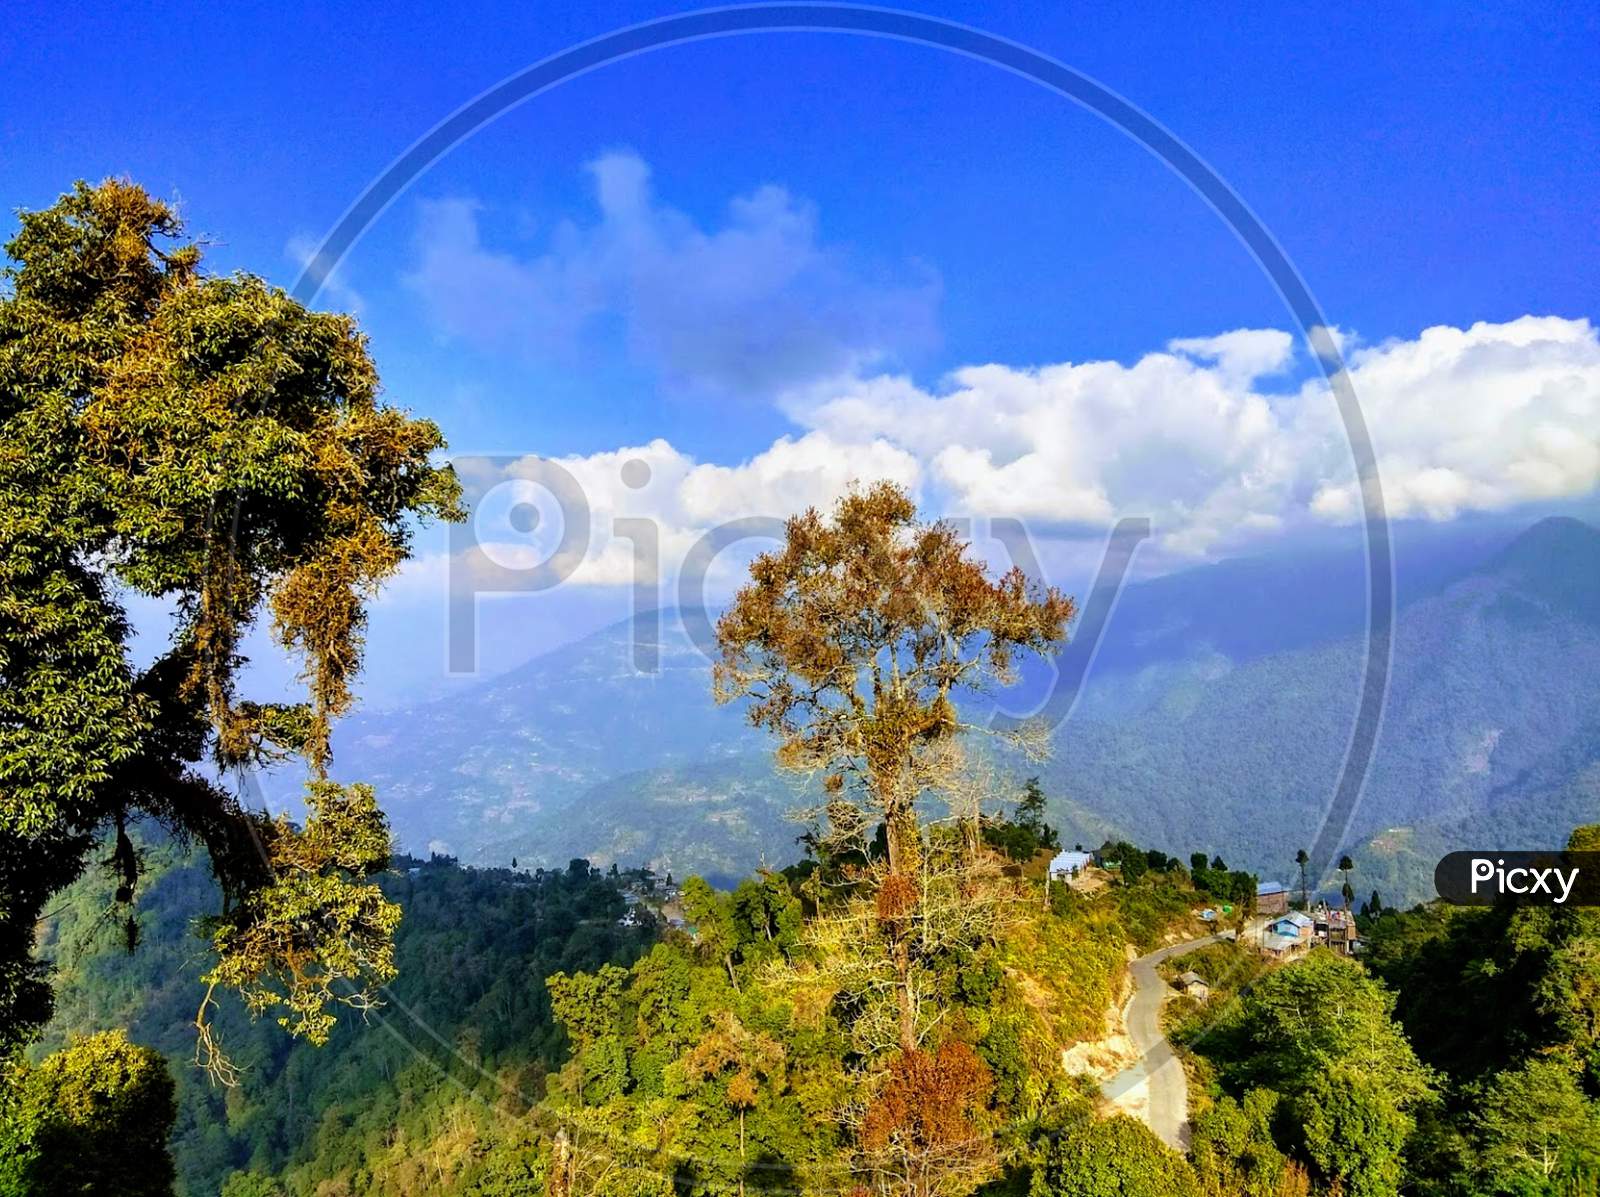 NIce mountain trees in the Range of Kanchenjunga of West Bengal